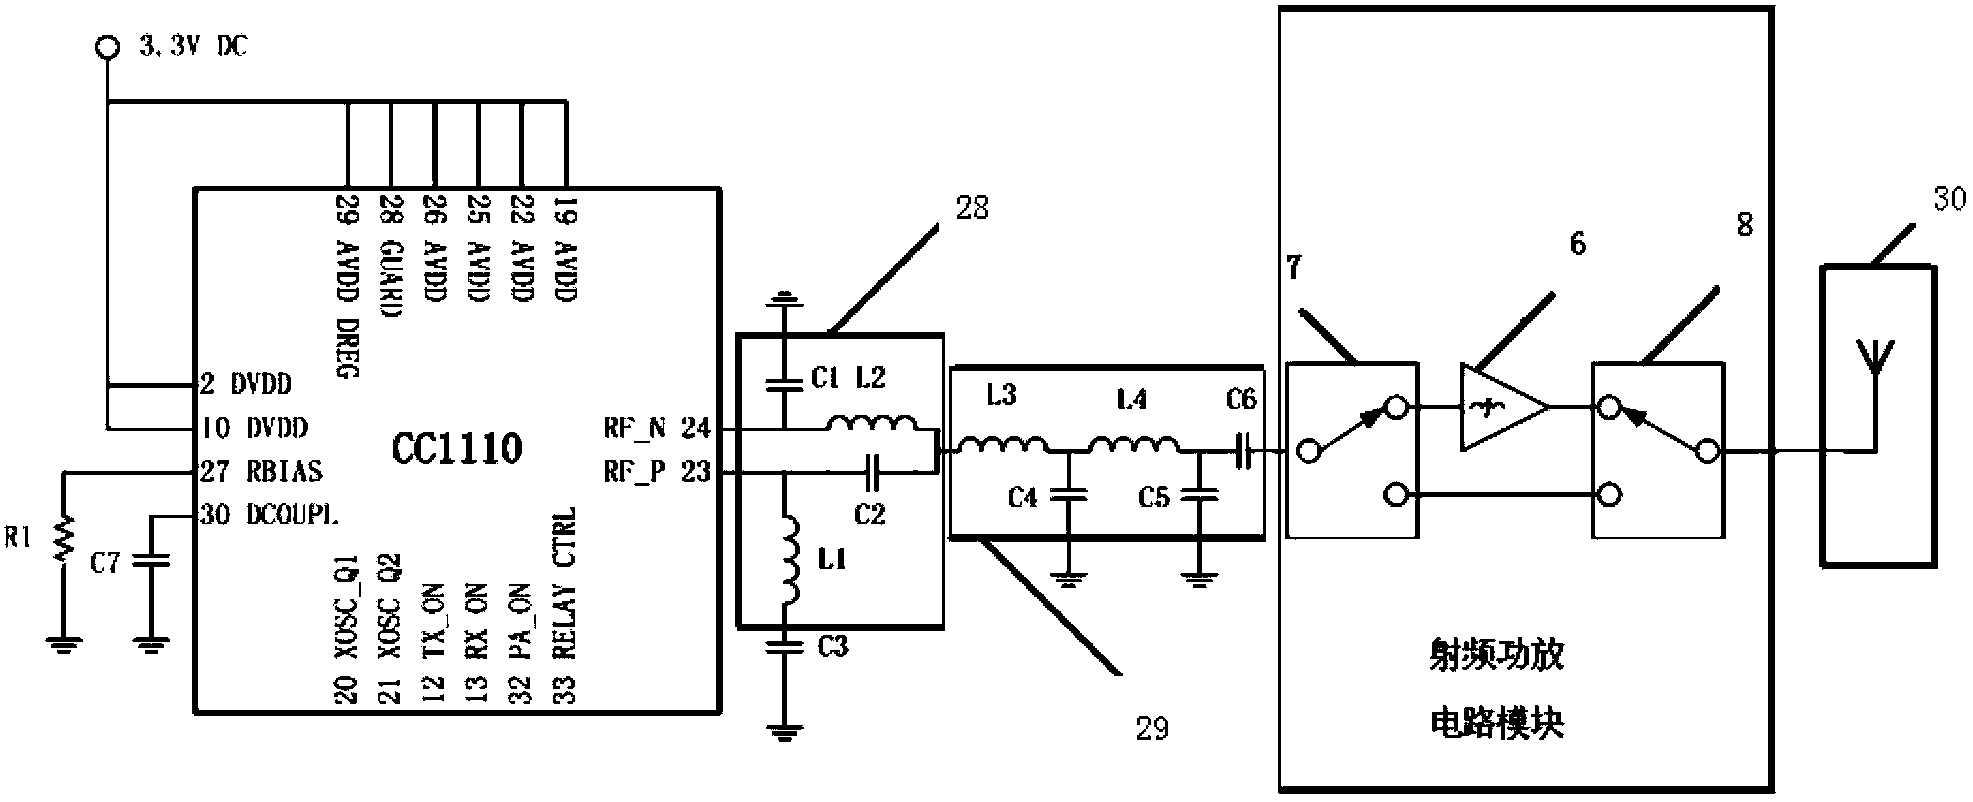 Wireless signal relay system capable of automatically controlling and monitoring